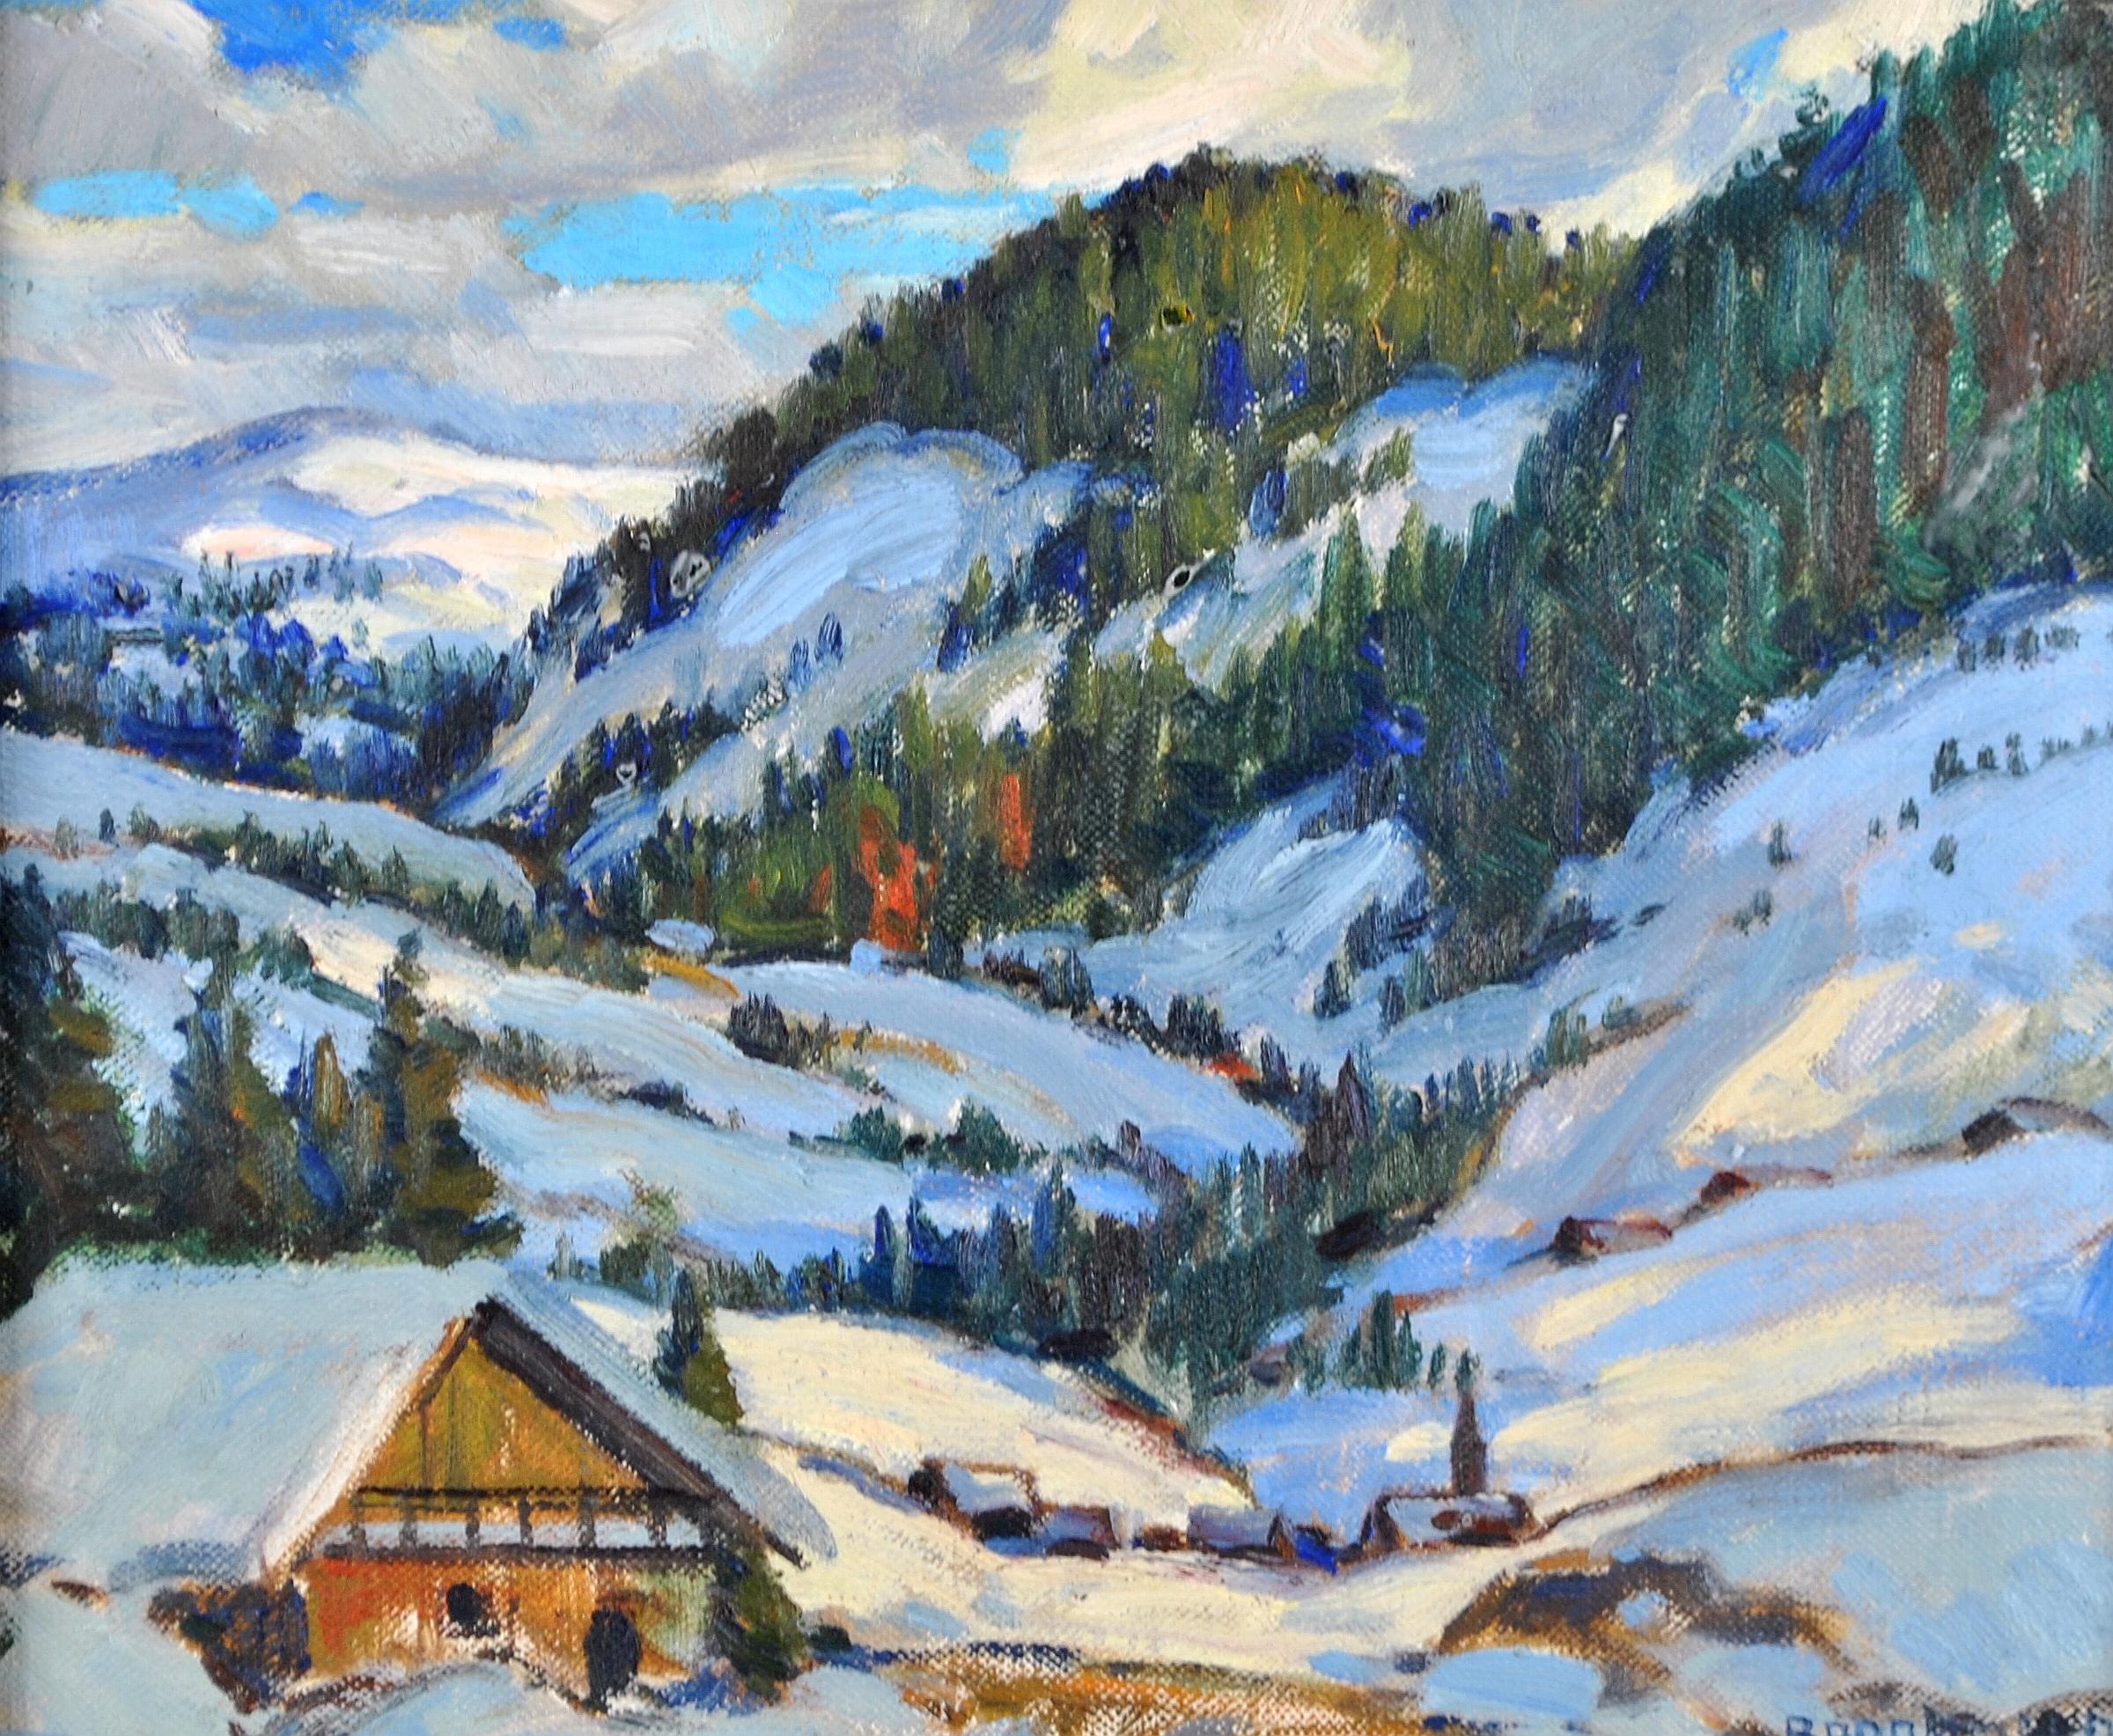 A beautiful 1940's impressionist oil on canvas laid on board depicting a snow covered Alpine Landscape by Canadian RA artist Adolphus George Broomfield.

This excellent quality and condition work is signed lower right and presented in it's original